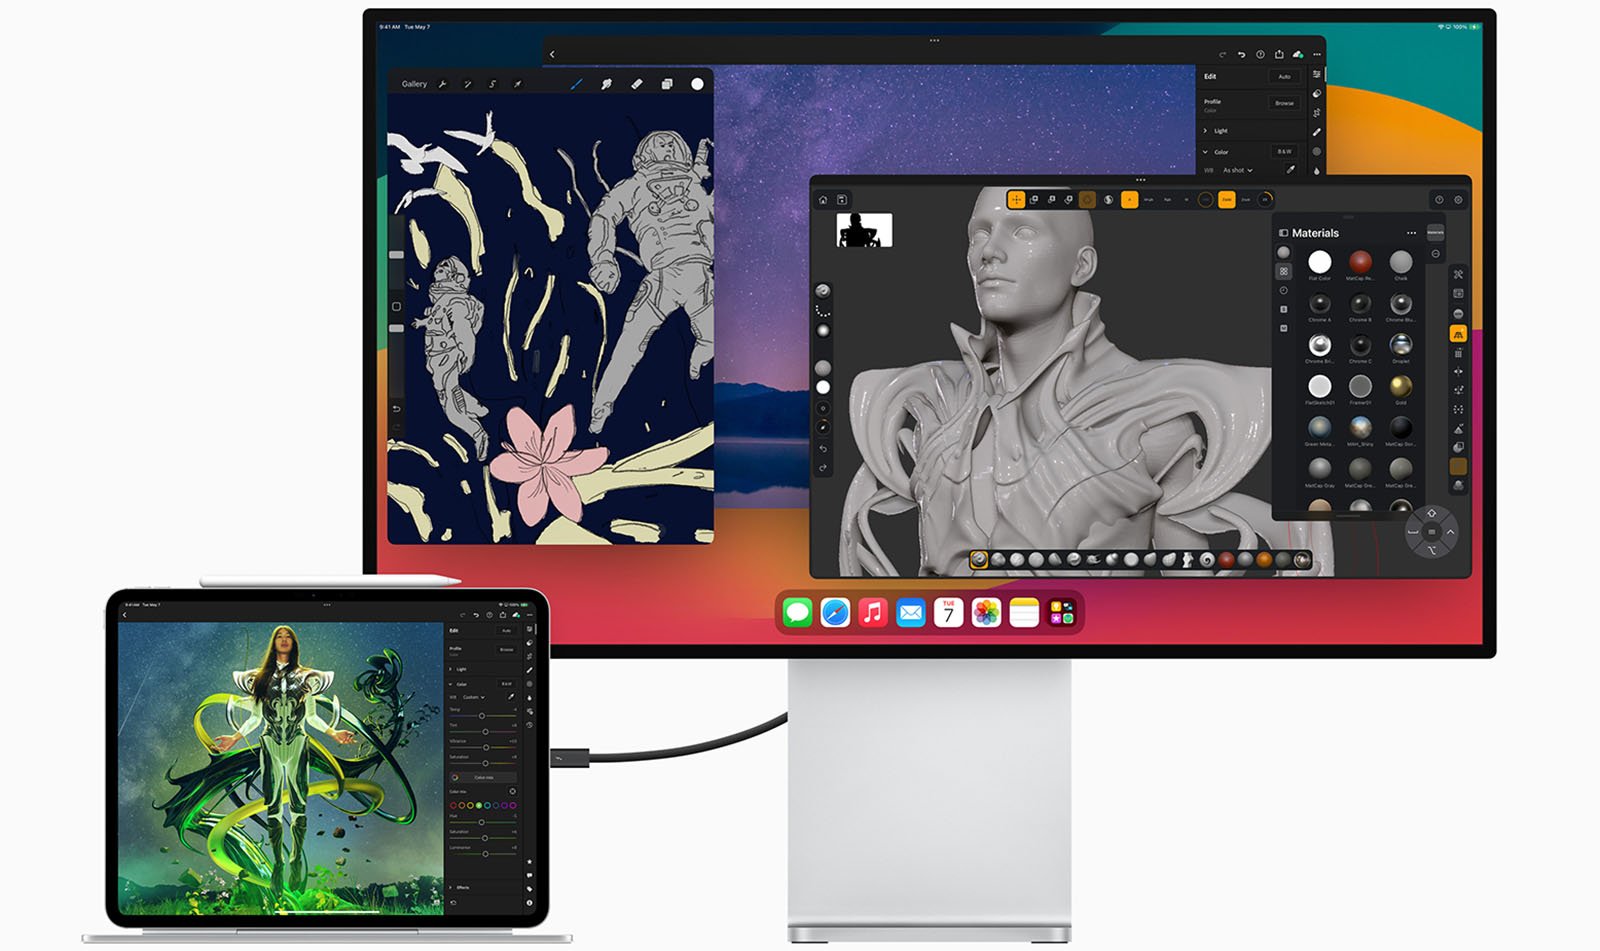 Three apple devices displaying digital art and design software, including a laptop, tablet, and desktop monitor, showcasing graphic illustrations and 3d modeling.